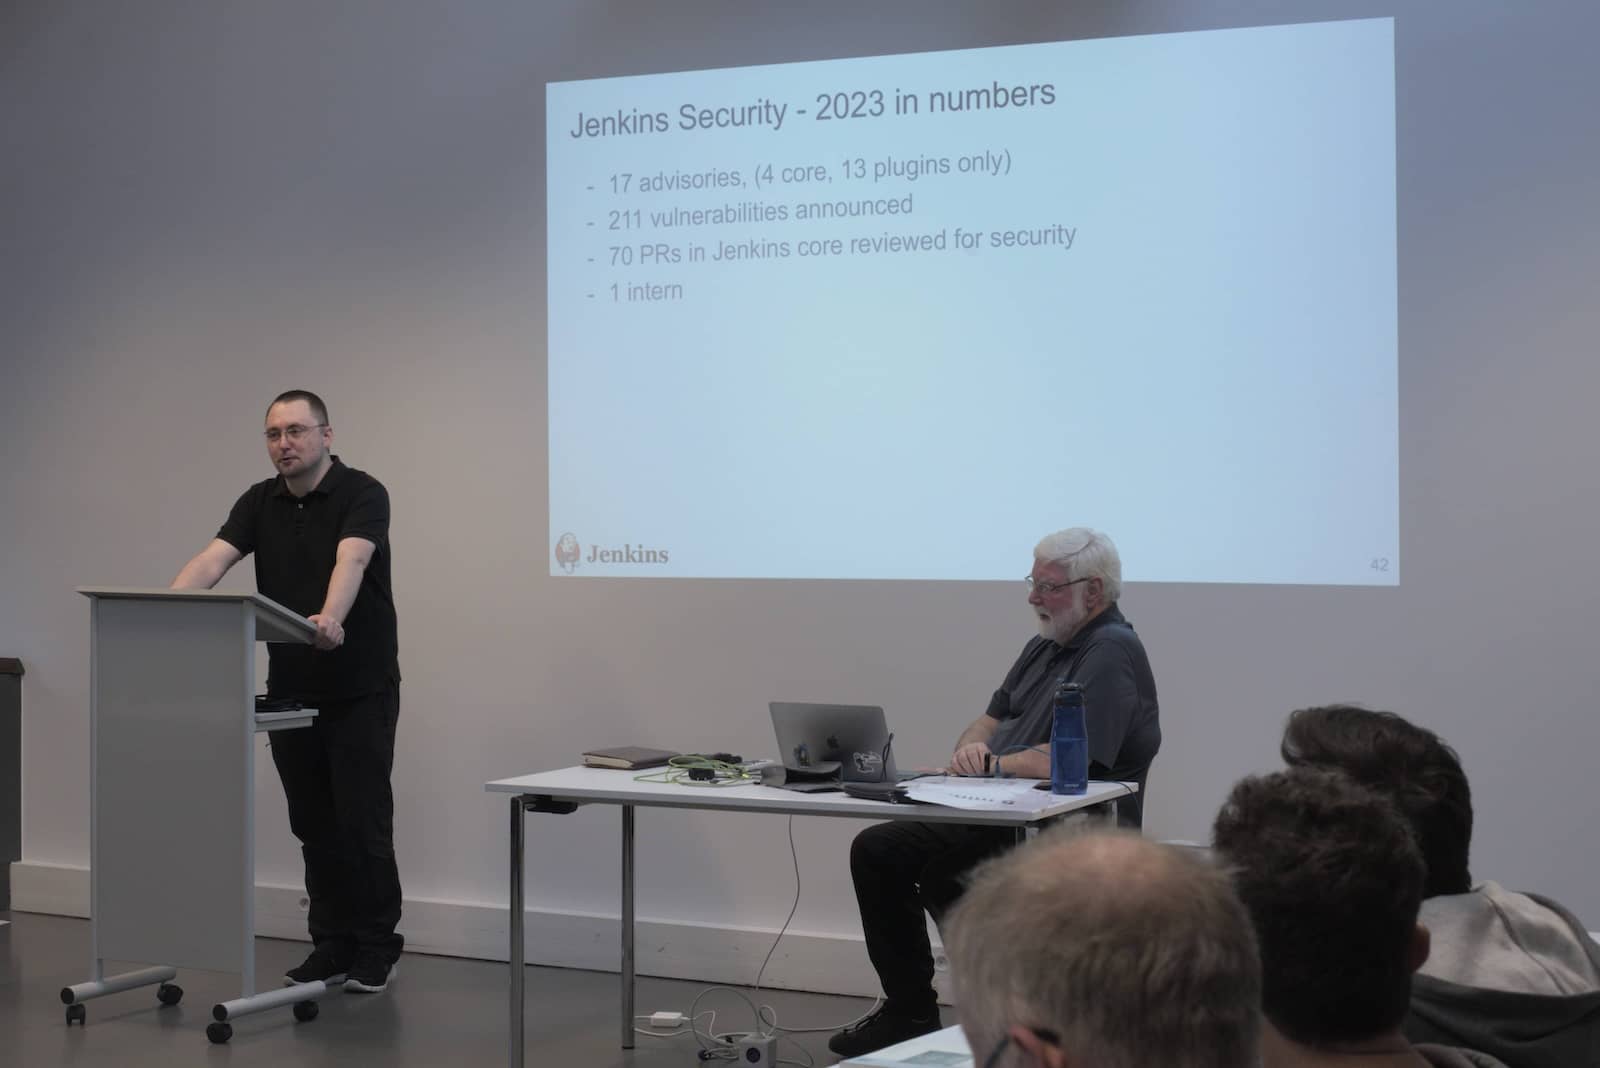 Wadeck Follonier reviews the statistics for Jenkins security in 2023.